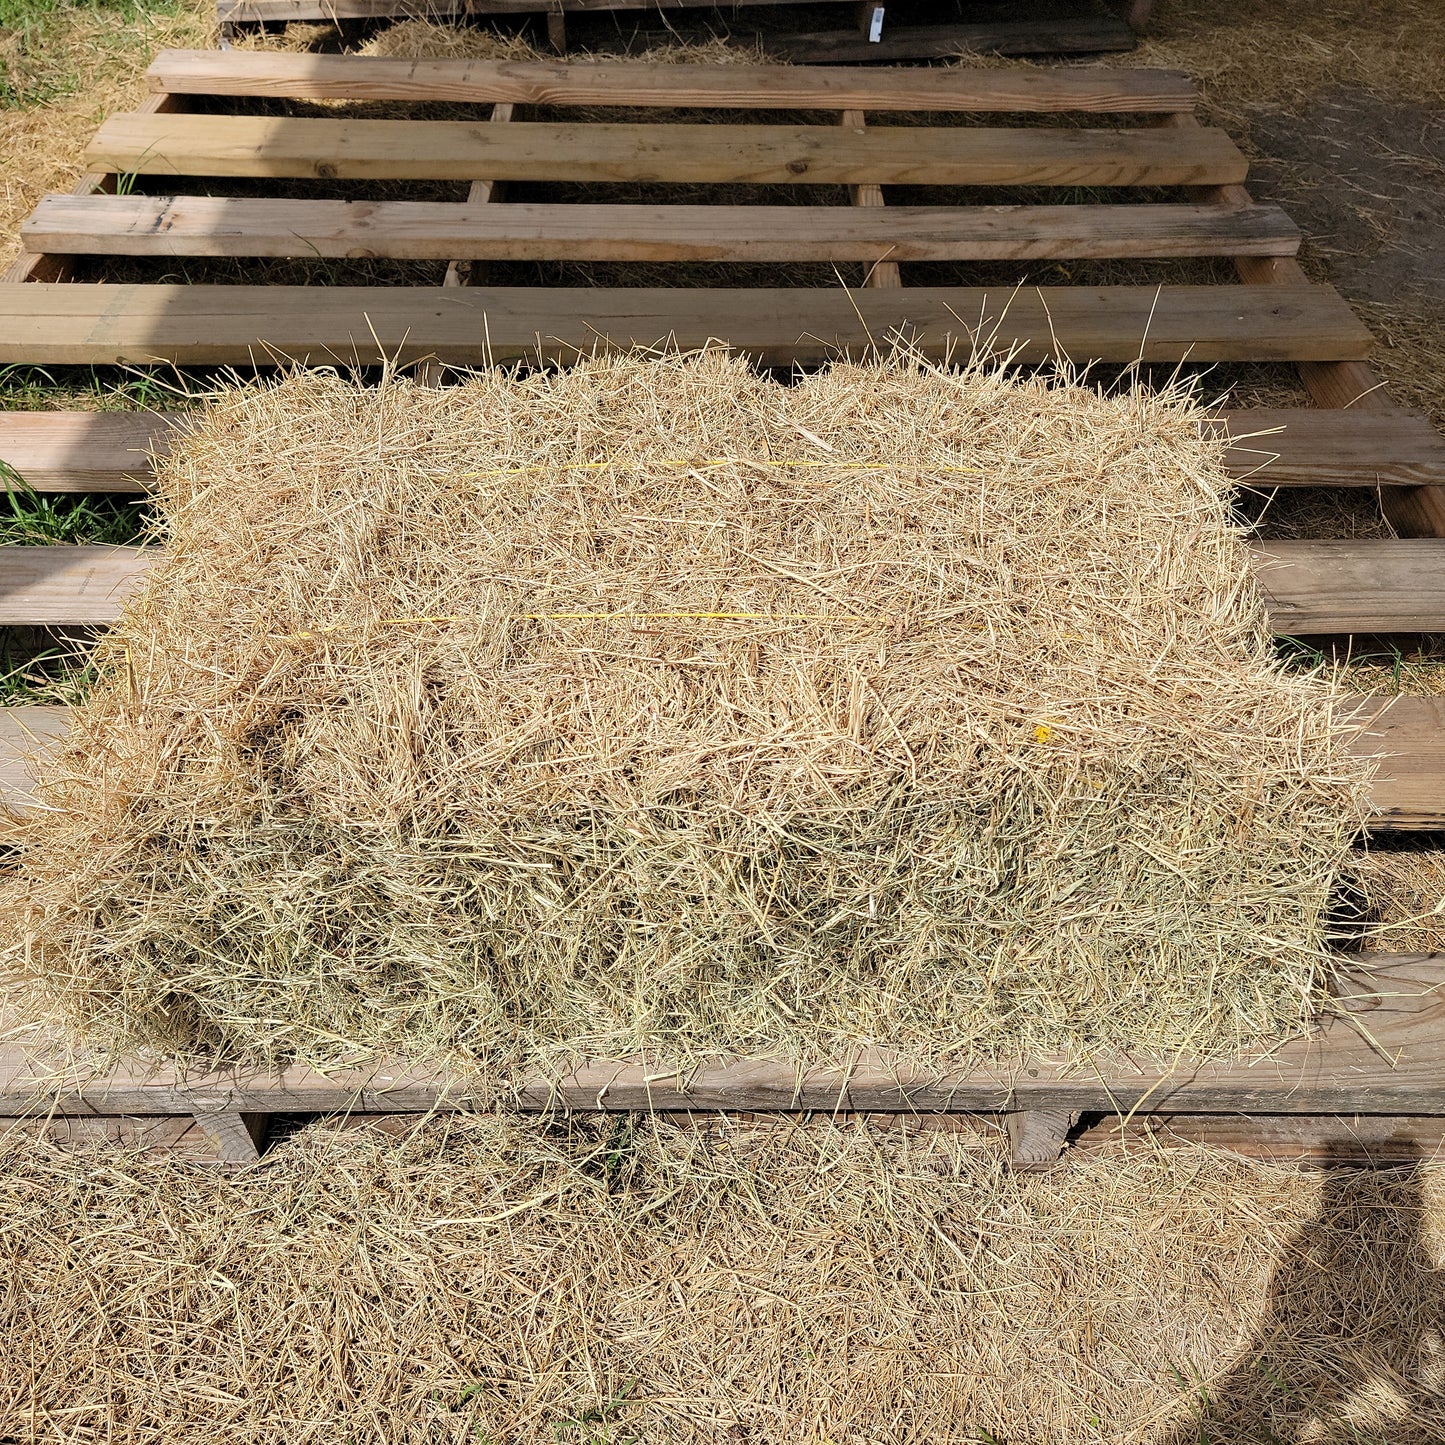 Hay Square Bale Grass-50#